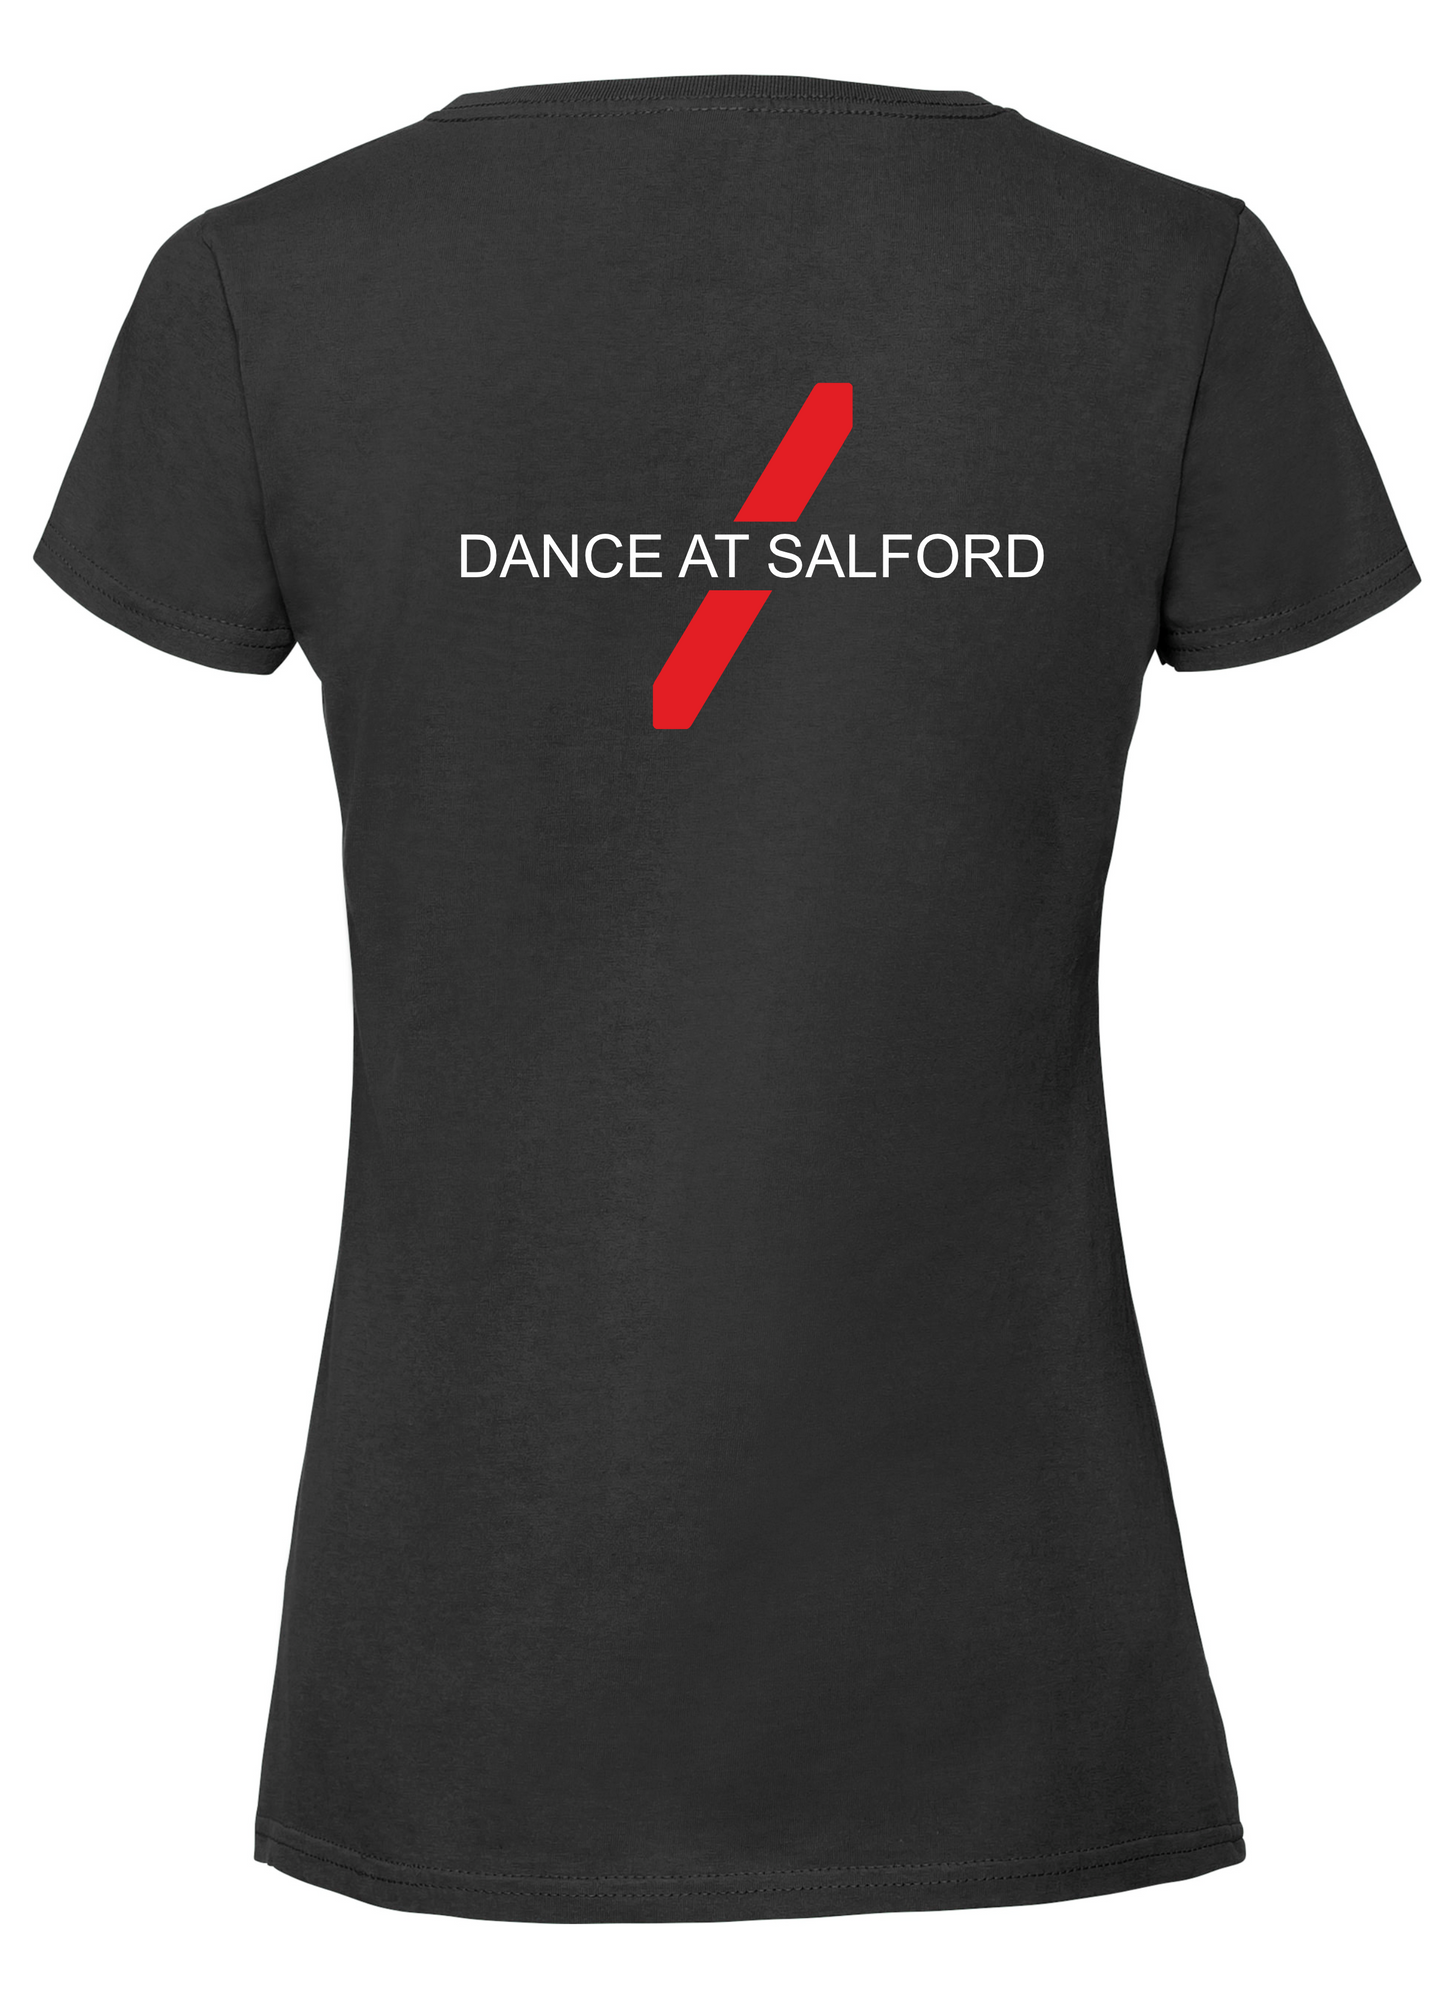 Dance at Salford Fruit of the Loom Women's T-Shirt